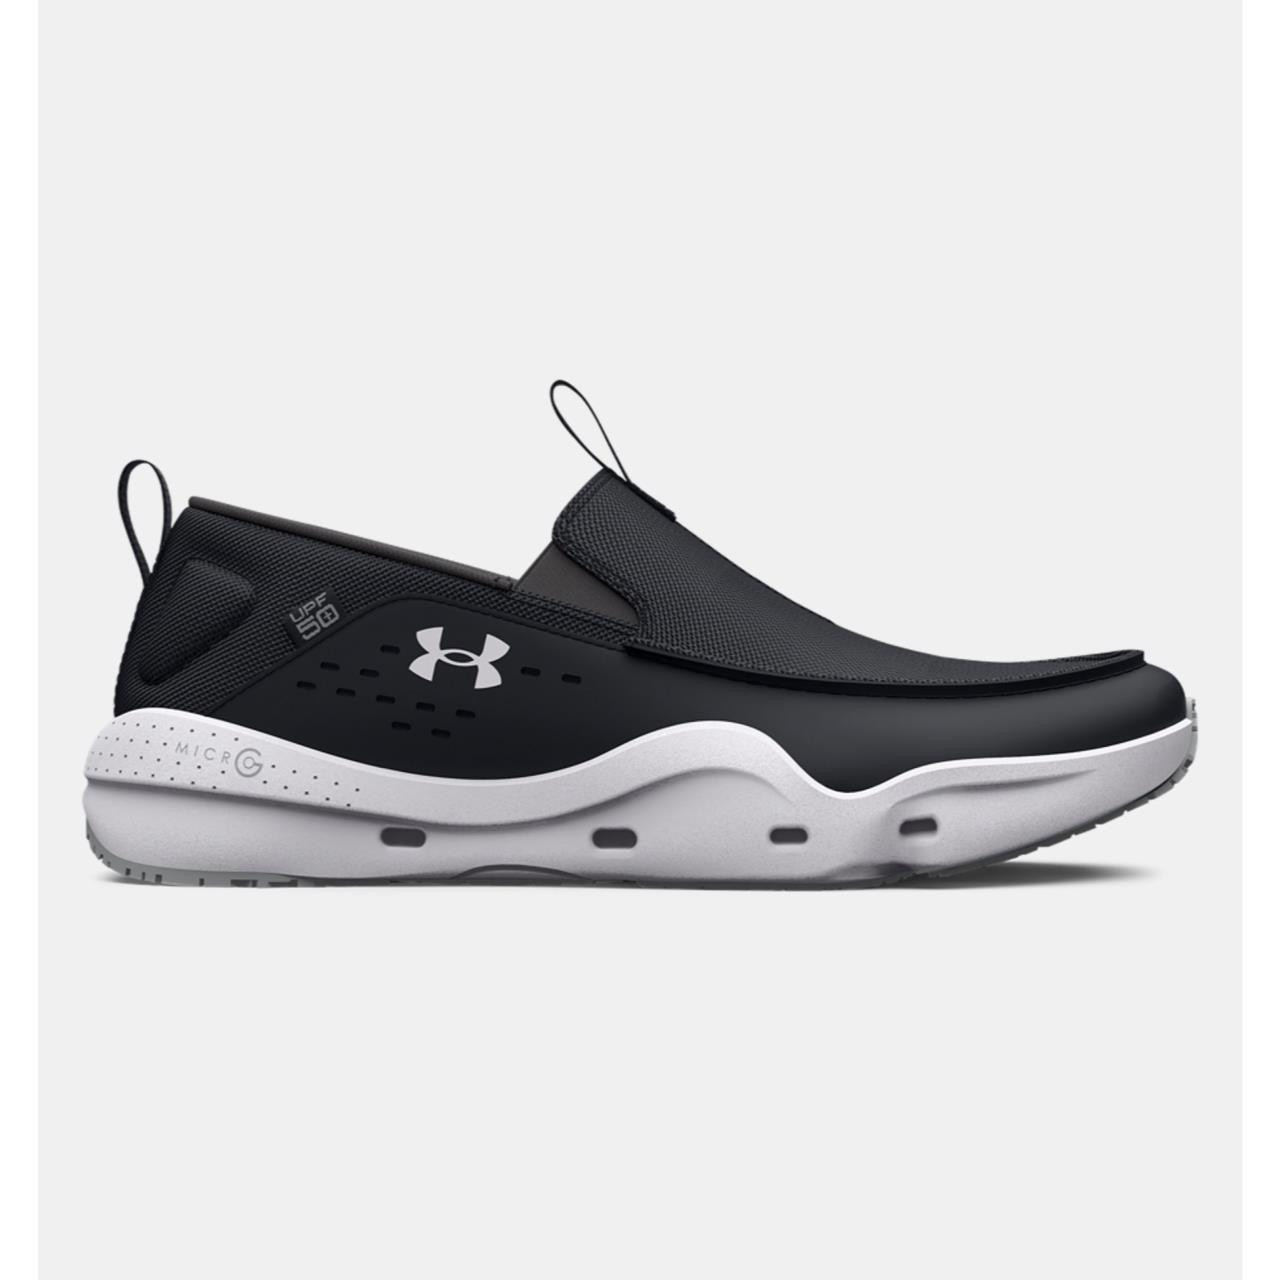 https://cdn11.bigcommerce.com/s-stfpjhht/images/stencil/1280x1280/products/27386/47952/Under-Armour-Men-s-UA-Micro-G-Kilchis-Slip-Recover-Fishing-Shoes-3026357-196040534701_image1__53935.1678755015.jpg?c=2